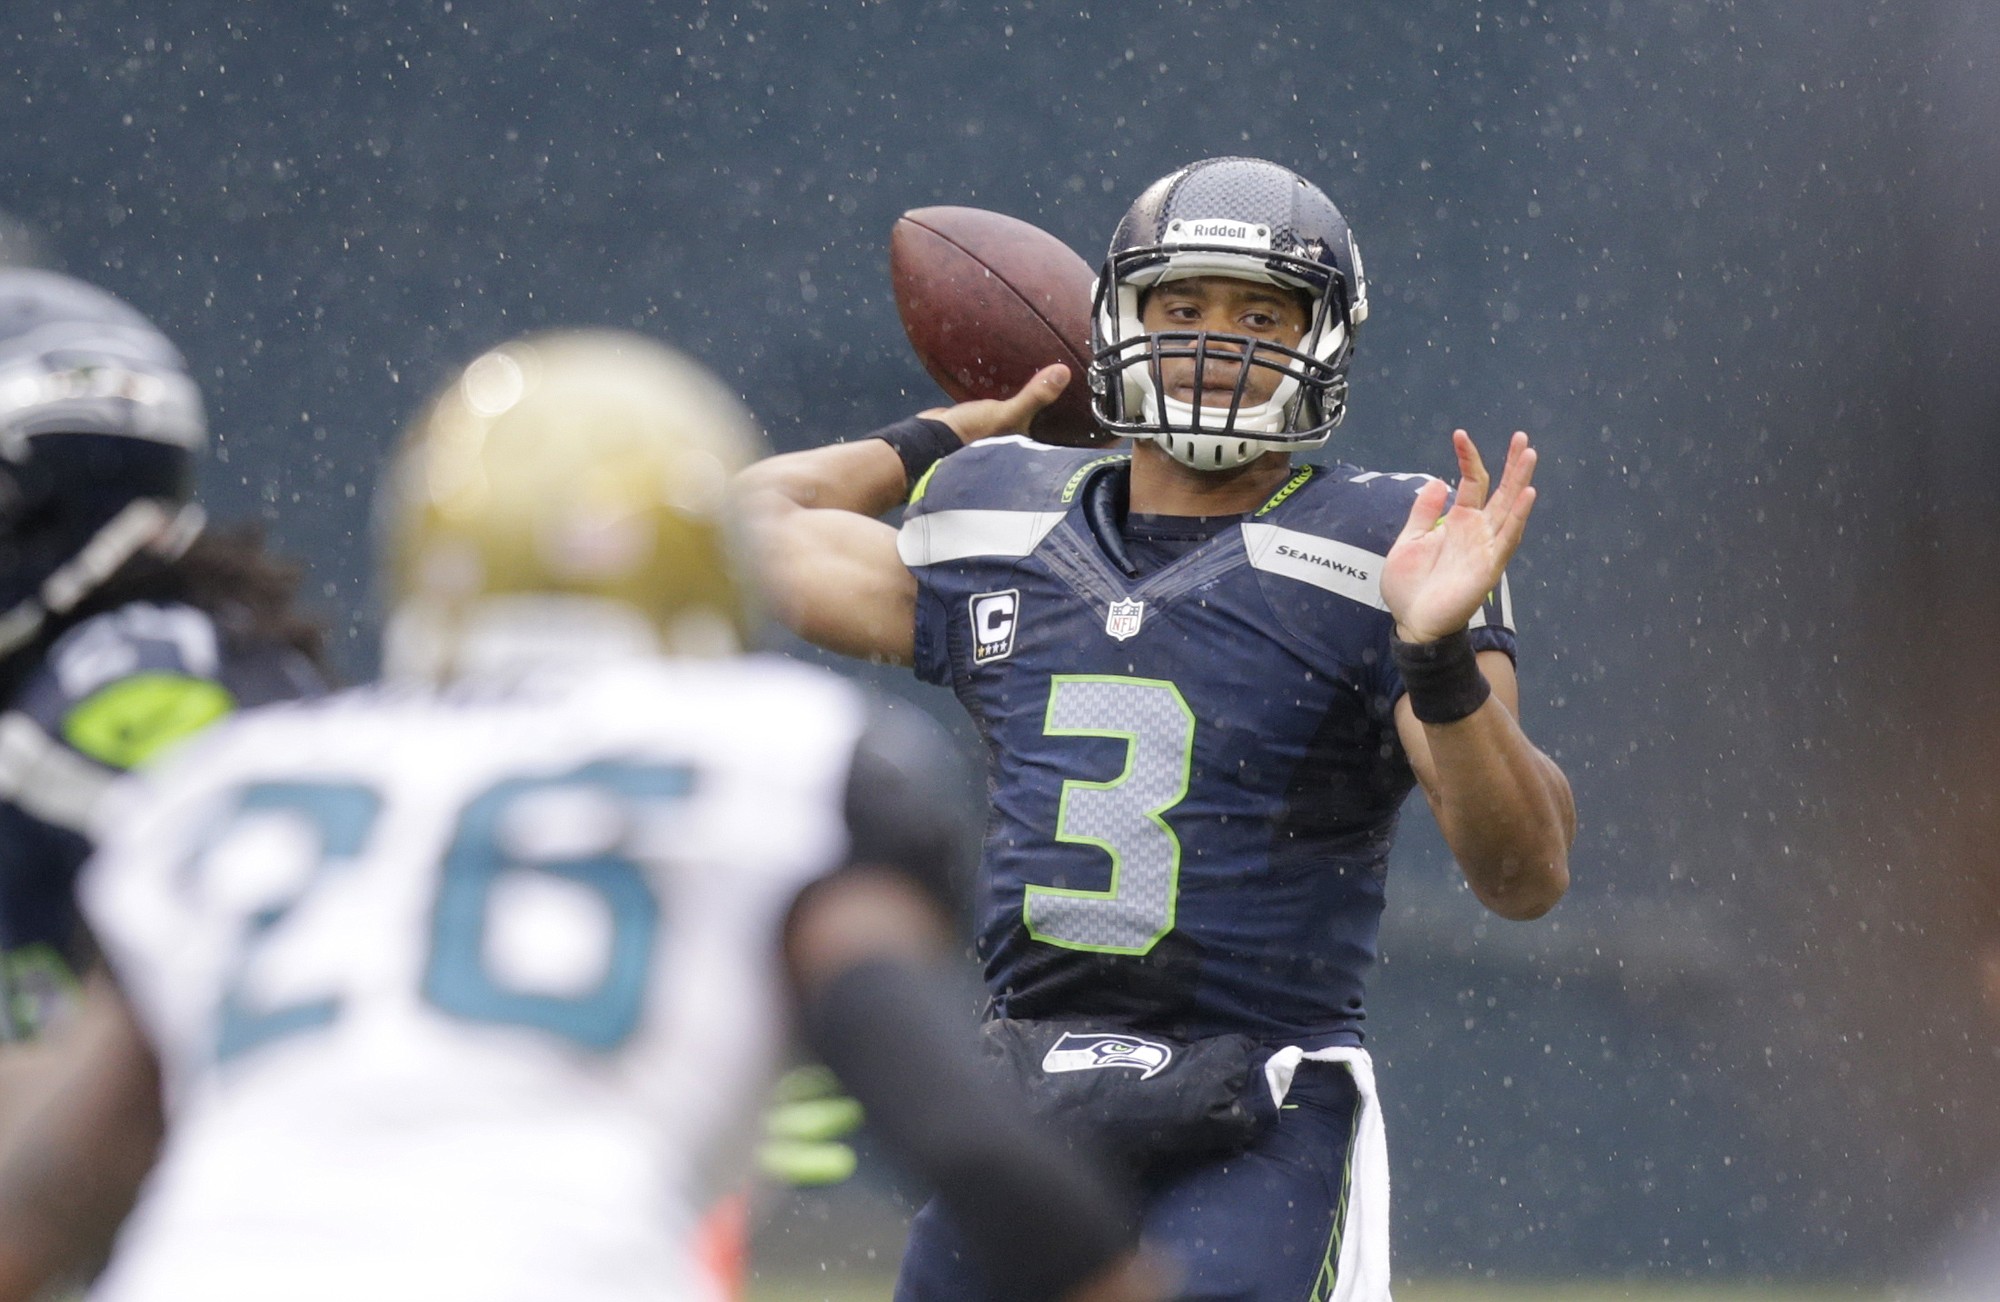 Seattle Seahawks quarterback Russell Wilson throws against the Jacksonville Jaguars in the first half of an NFL football game in the rain on Sunday, Sept. 22, 2013, in Seattle.